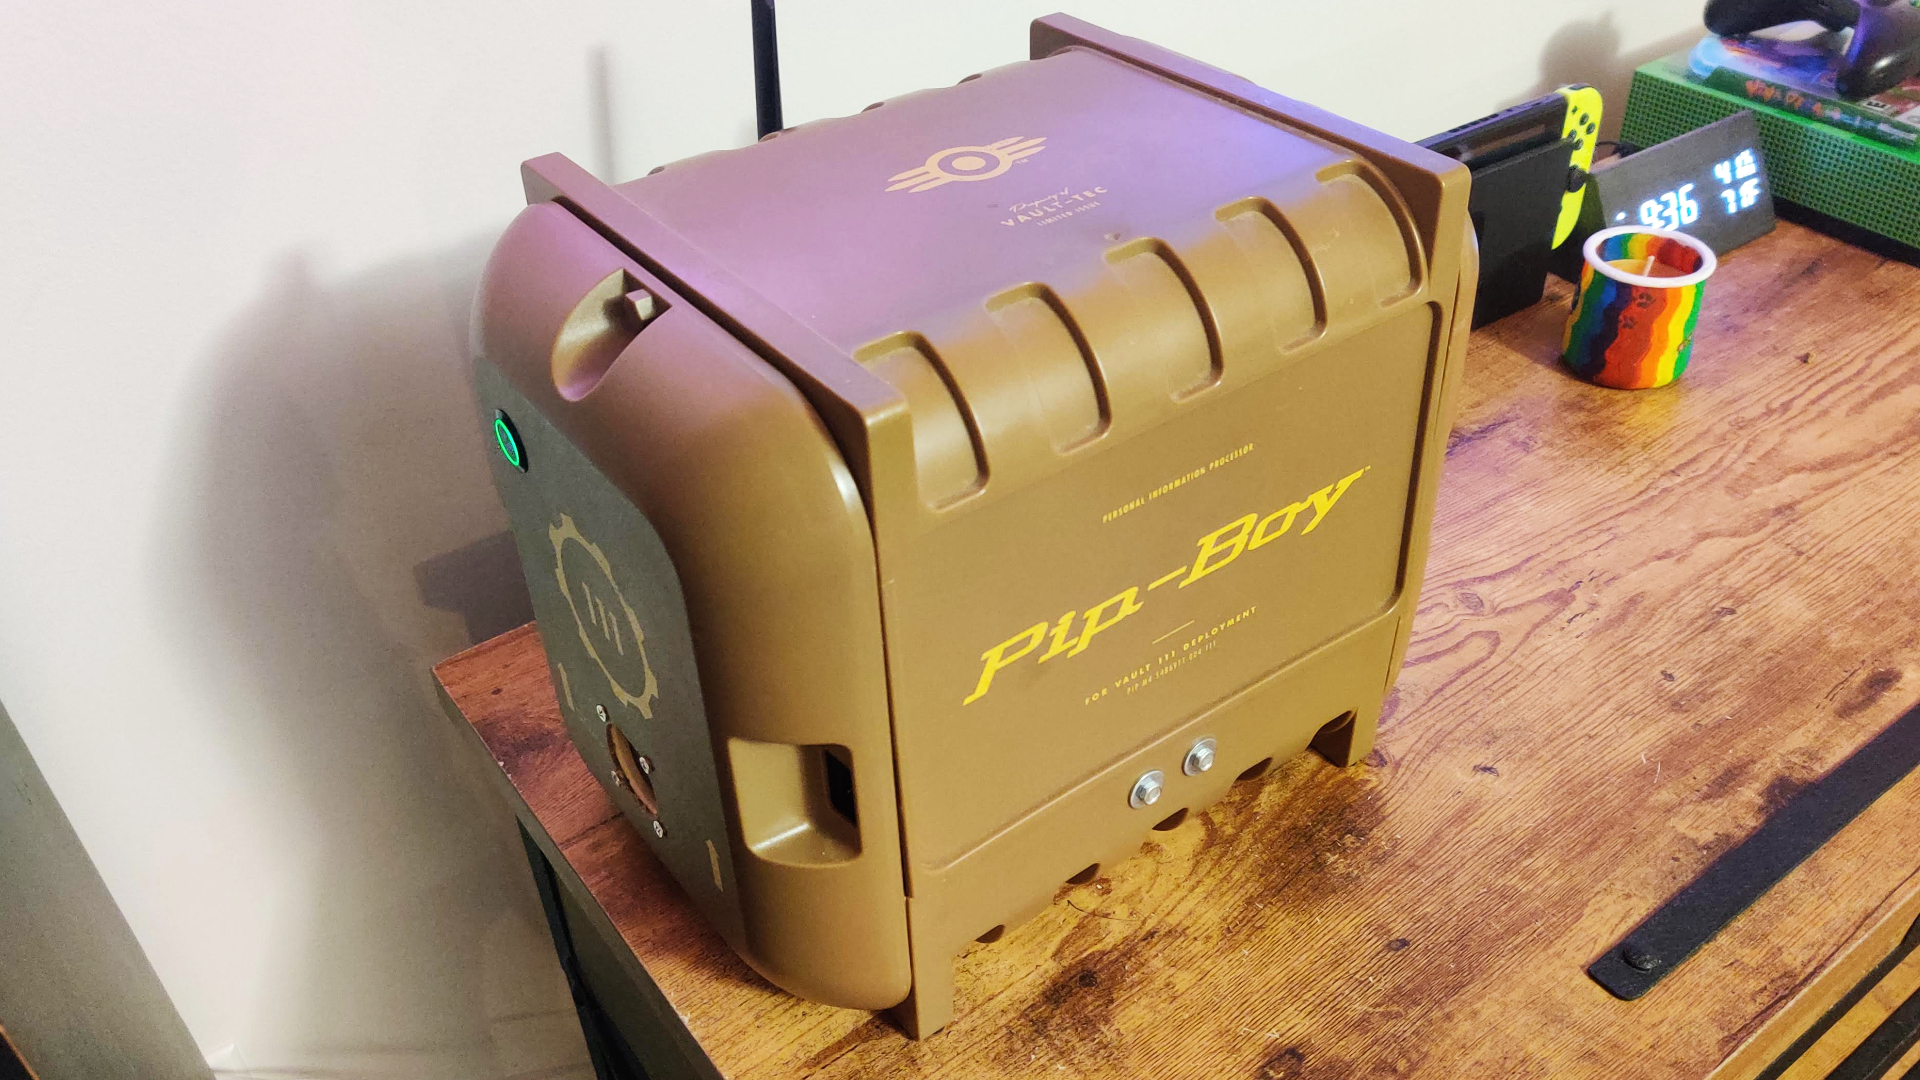 Meet the Fallout 4 Pip-Boy gaming PC mod you can't fit on your wrist